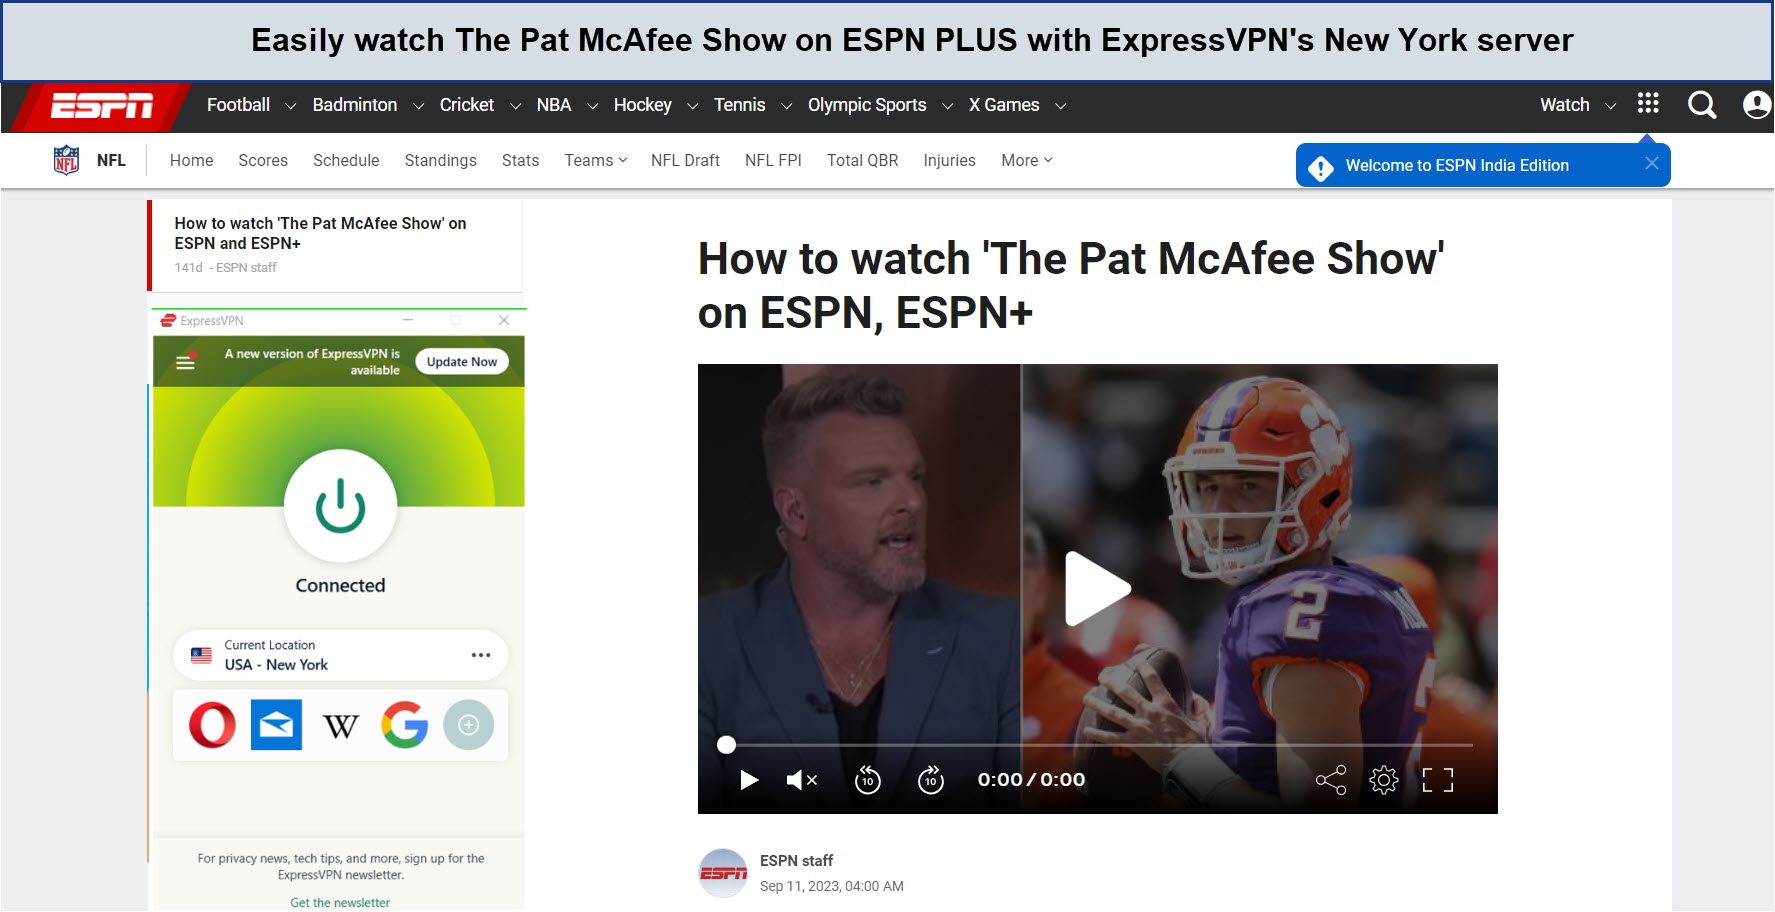 watch-The-Pat-McAfee-Show-on-ESPN-PLUS-with-ExpressVPN-in-Canada